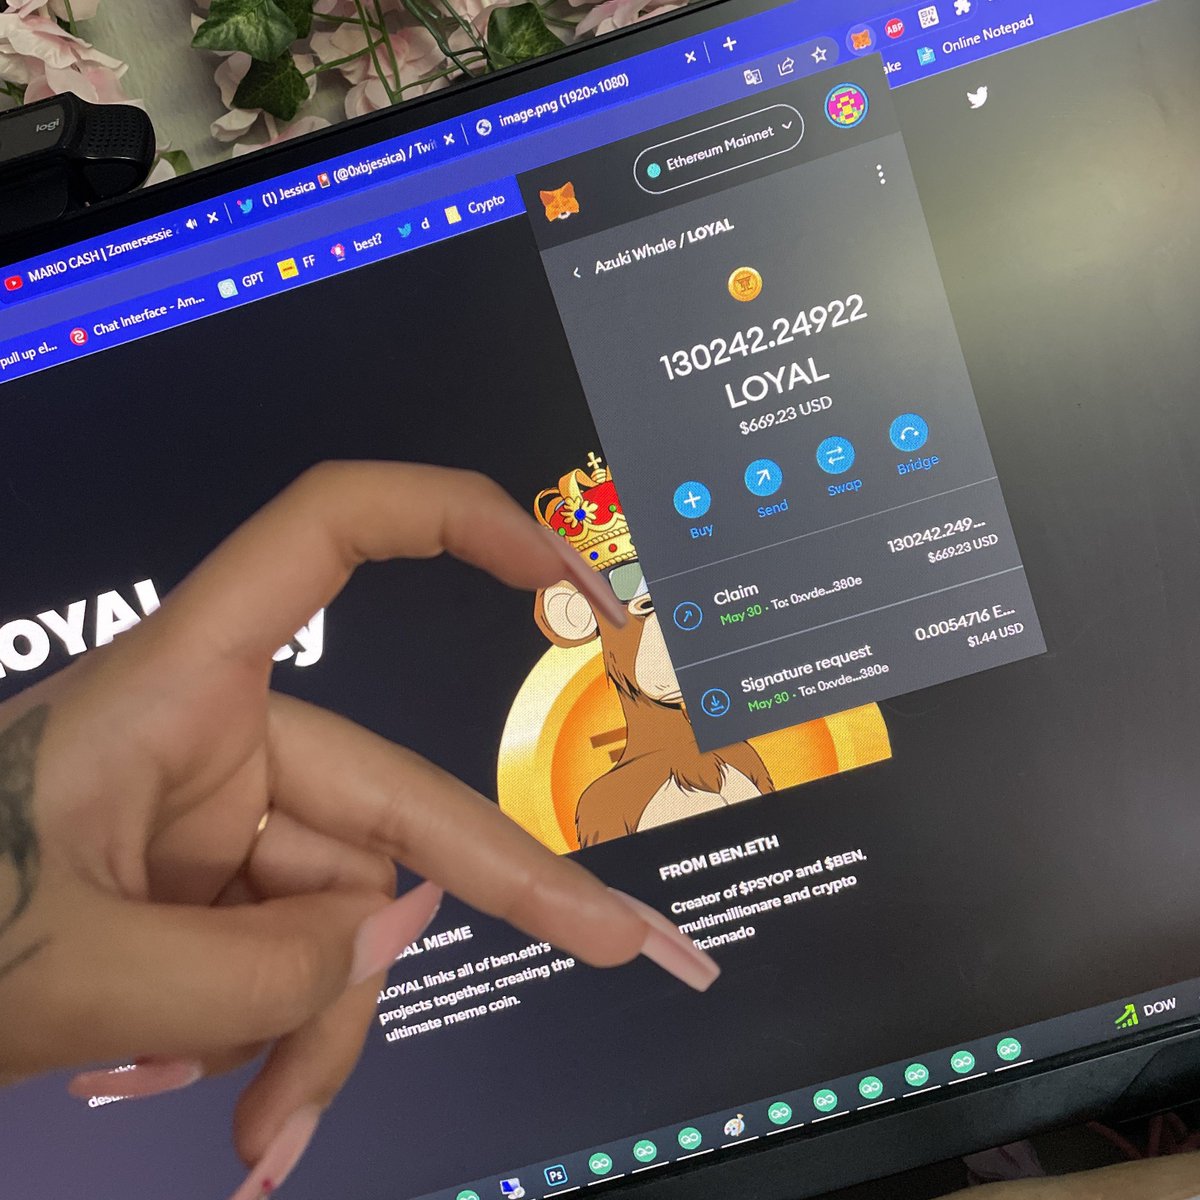 omg i just claimed $670 from the $LOYAL airdrop? claim now 👇

🔗 loyal.gs 🎁

$CAW $SHIB $FLOKI Pauly $PSYOP $BEN #USDT $BTC $ADA #crypto #100X #MATIC BTC $HABIBI $SUI Ether #USDC $QNT #NFTs $XEN $APE #ETH #altcoins $LINK $DOGE $XRP $PEPE $MONG $BOB $WAGMI #MATIC